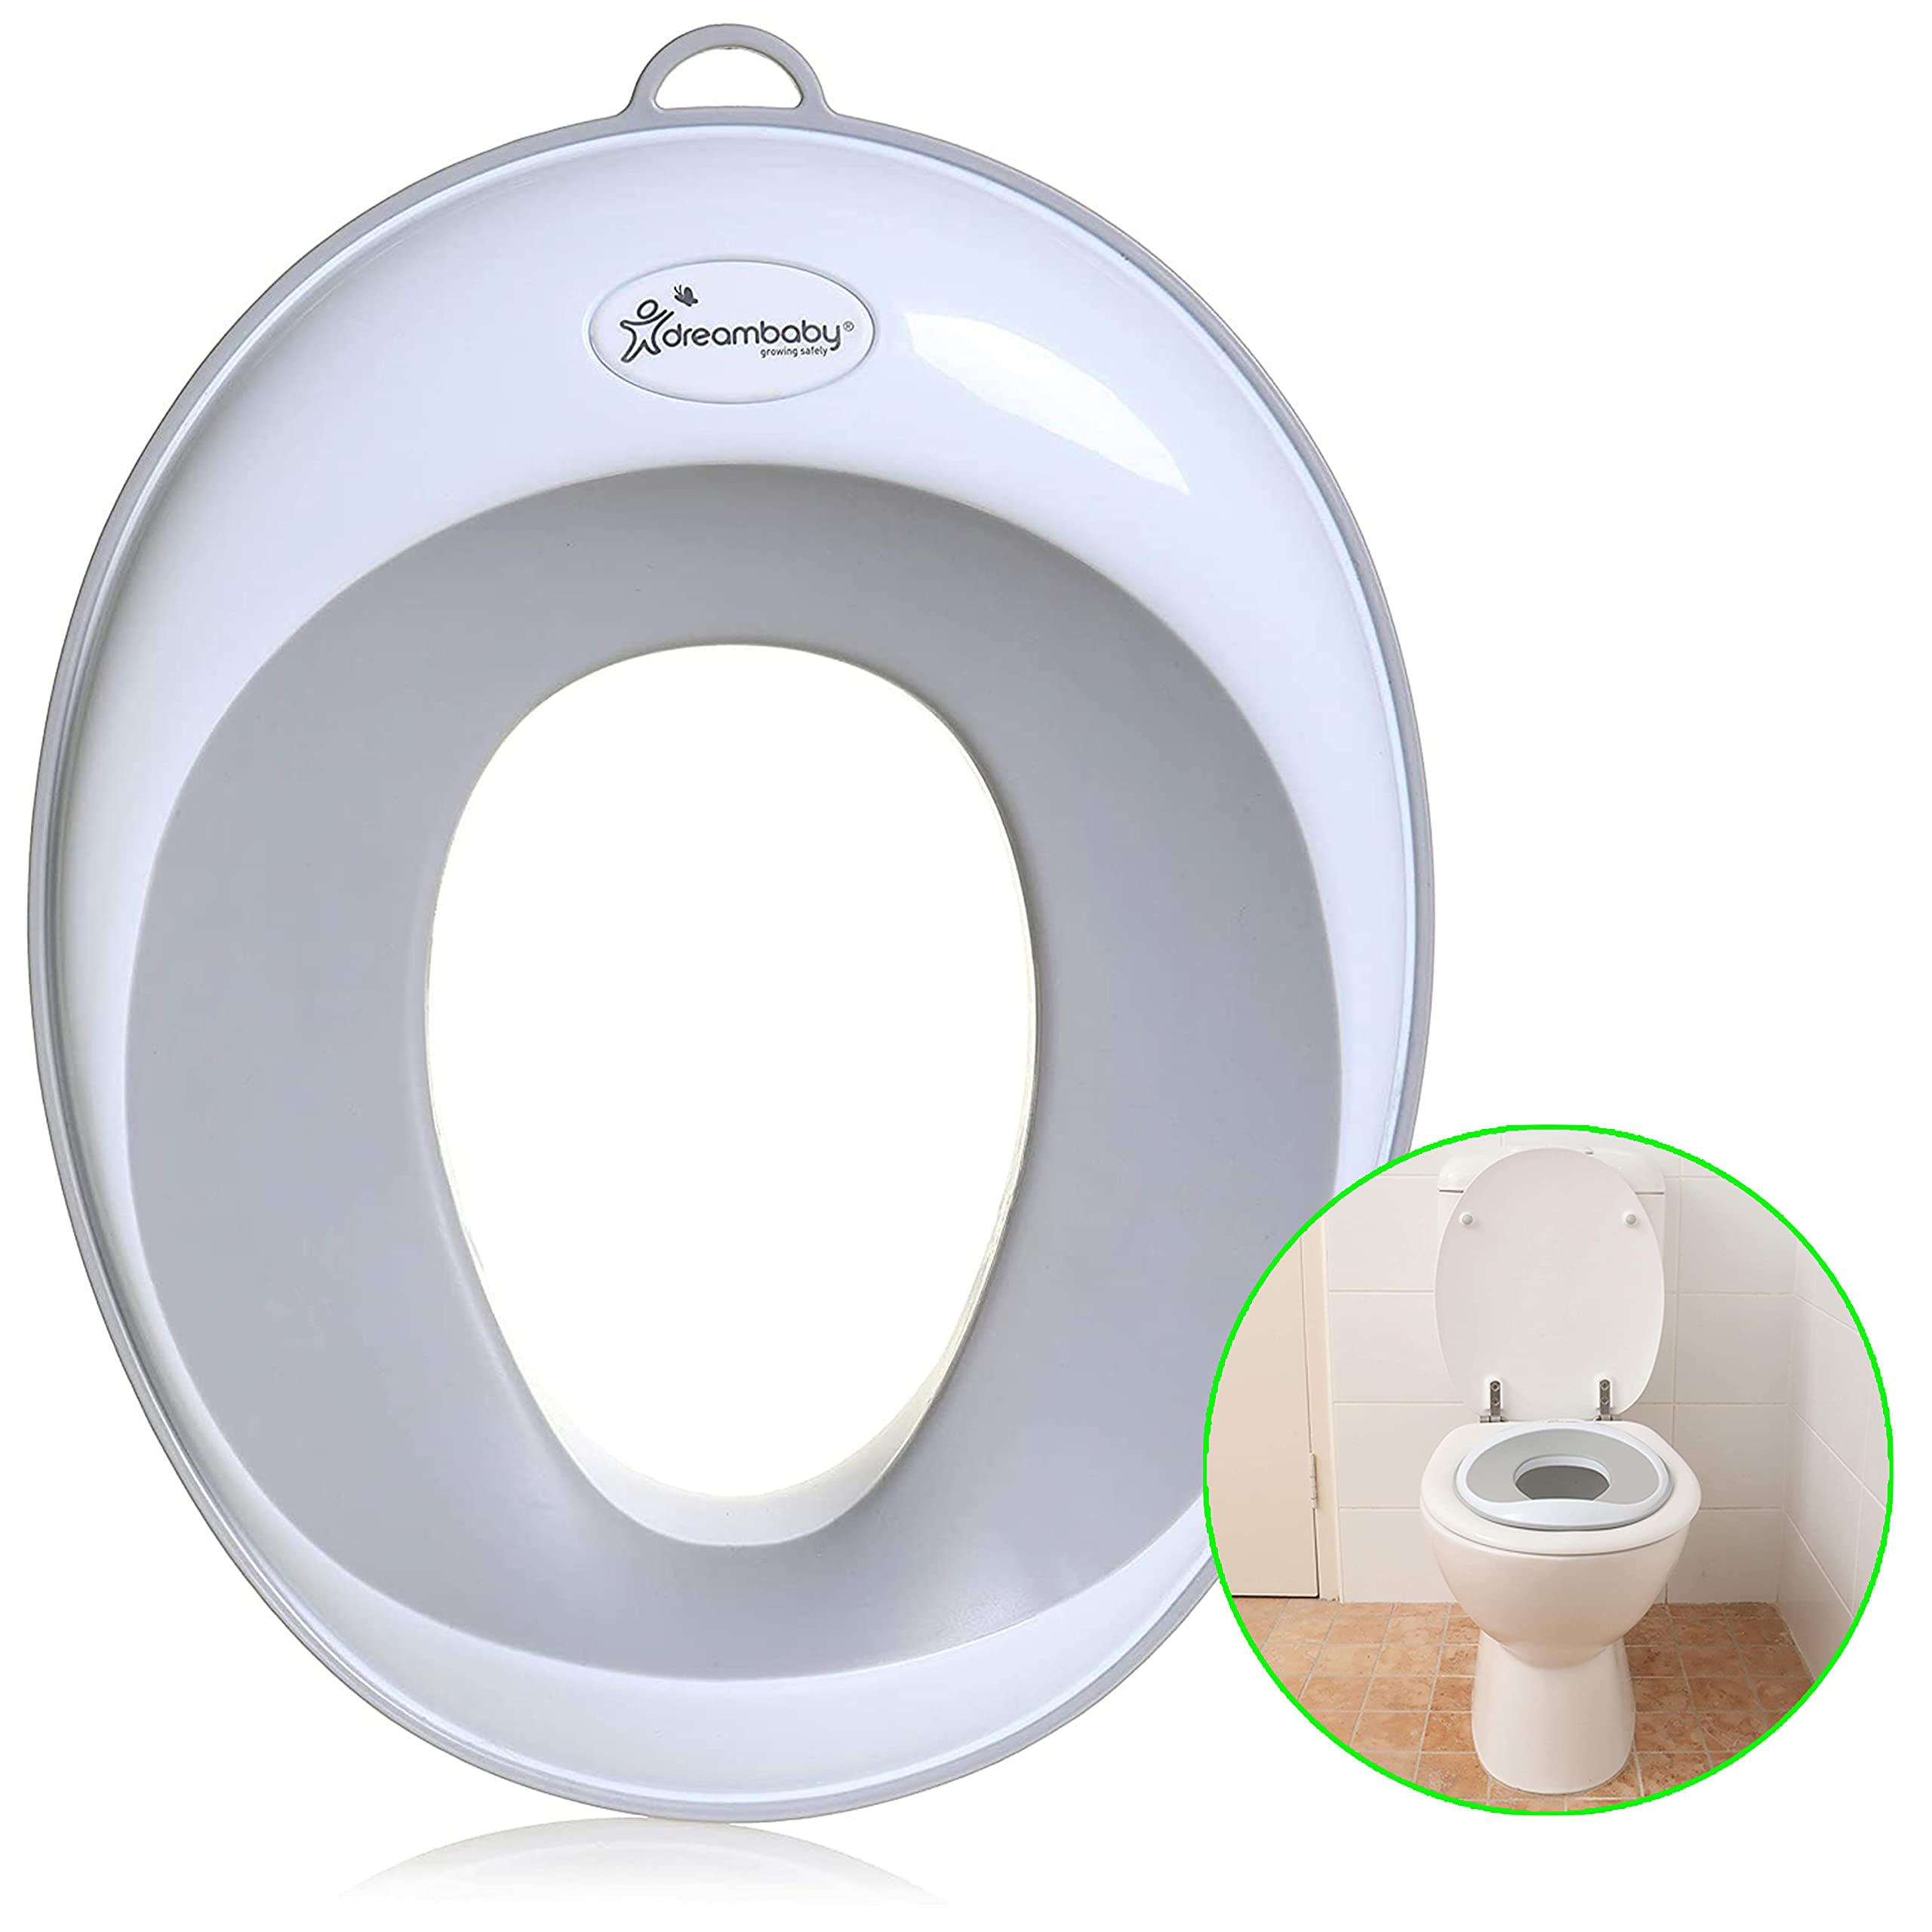 Dreambaby EZY- Potty Training Toilet Seat Topper, Non-Slip and Great for Travel, Grey, Toilet Training Seat